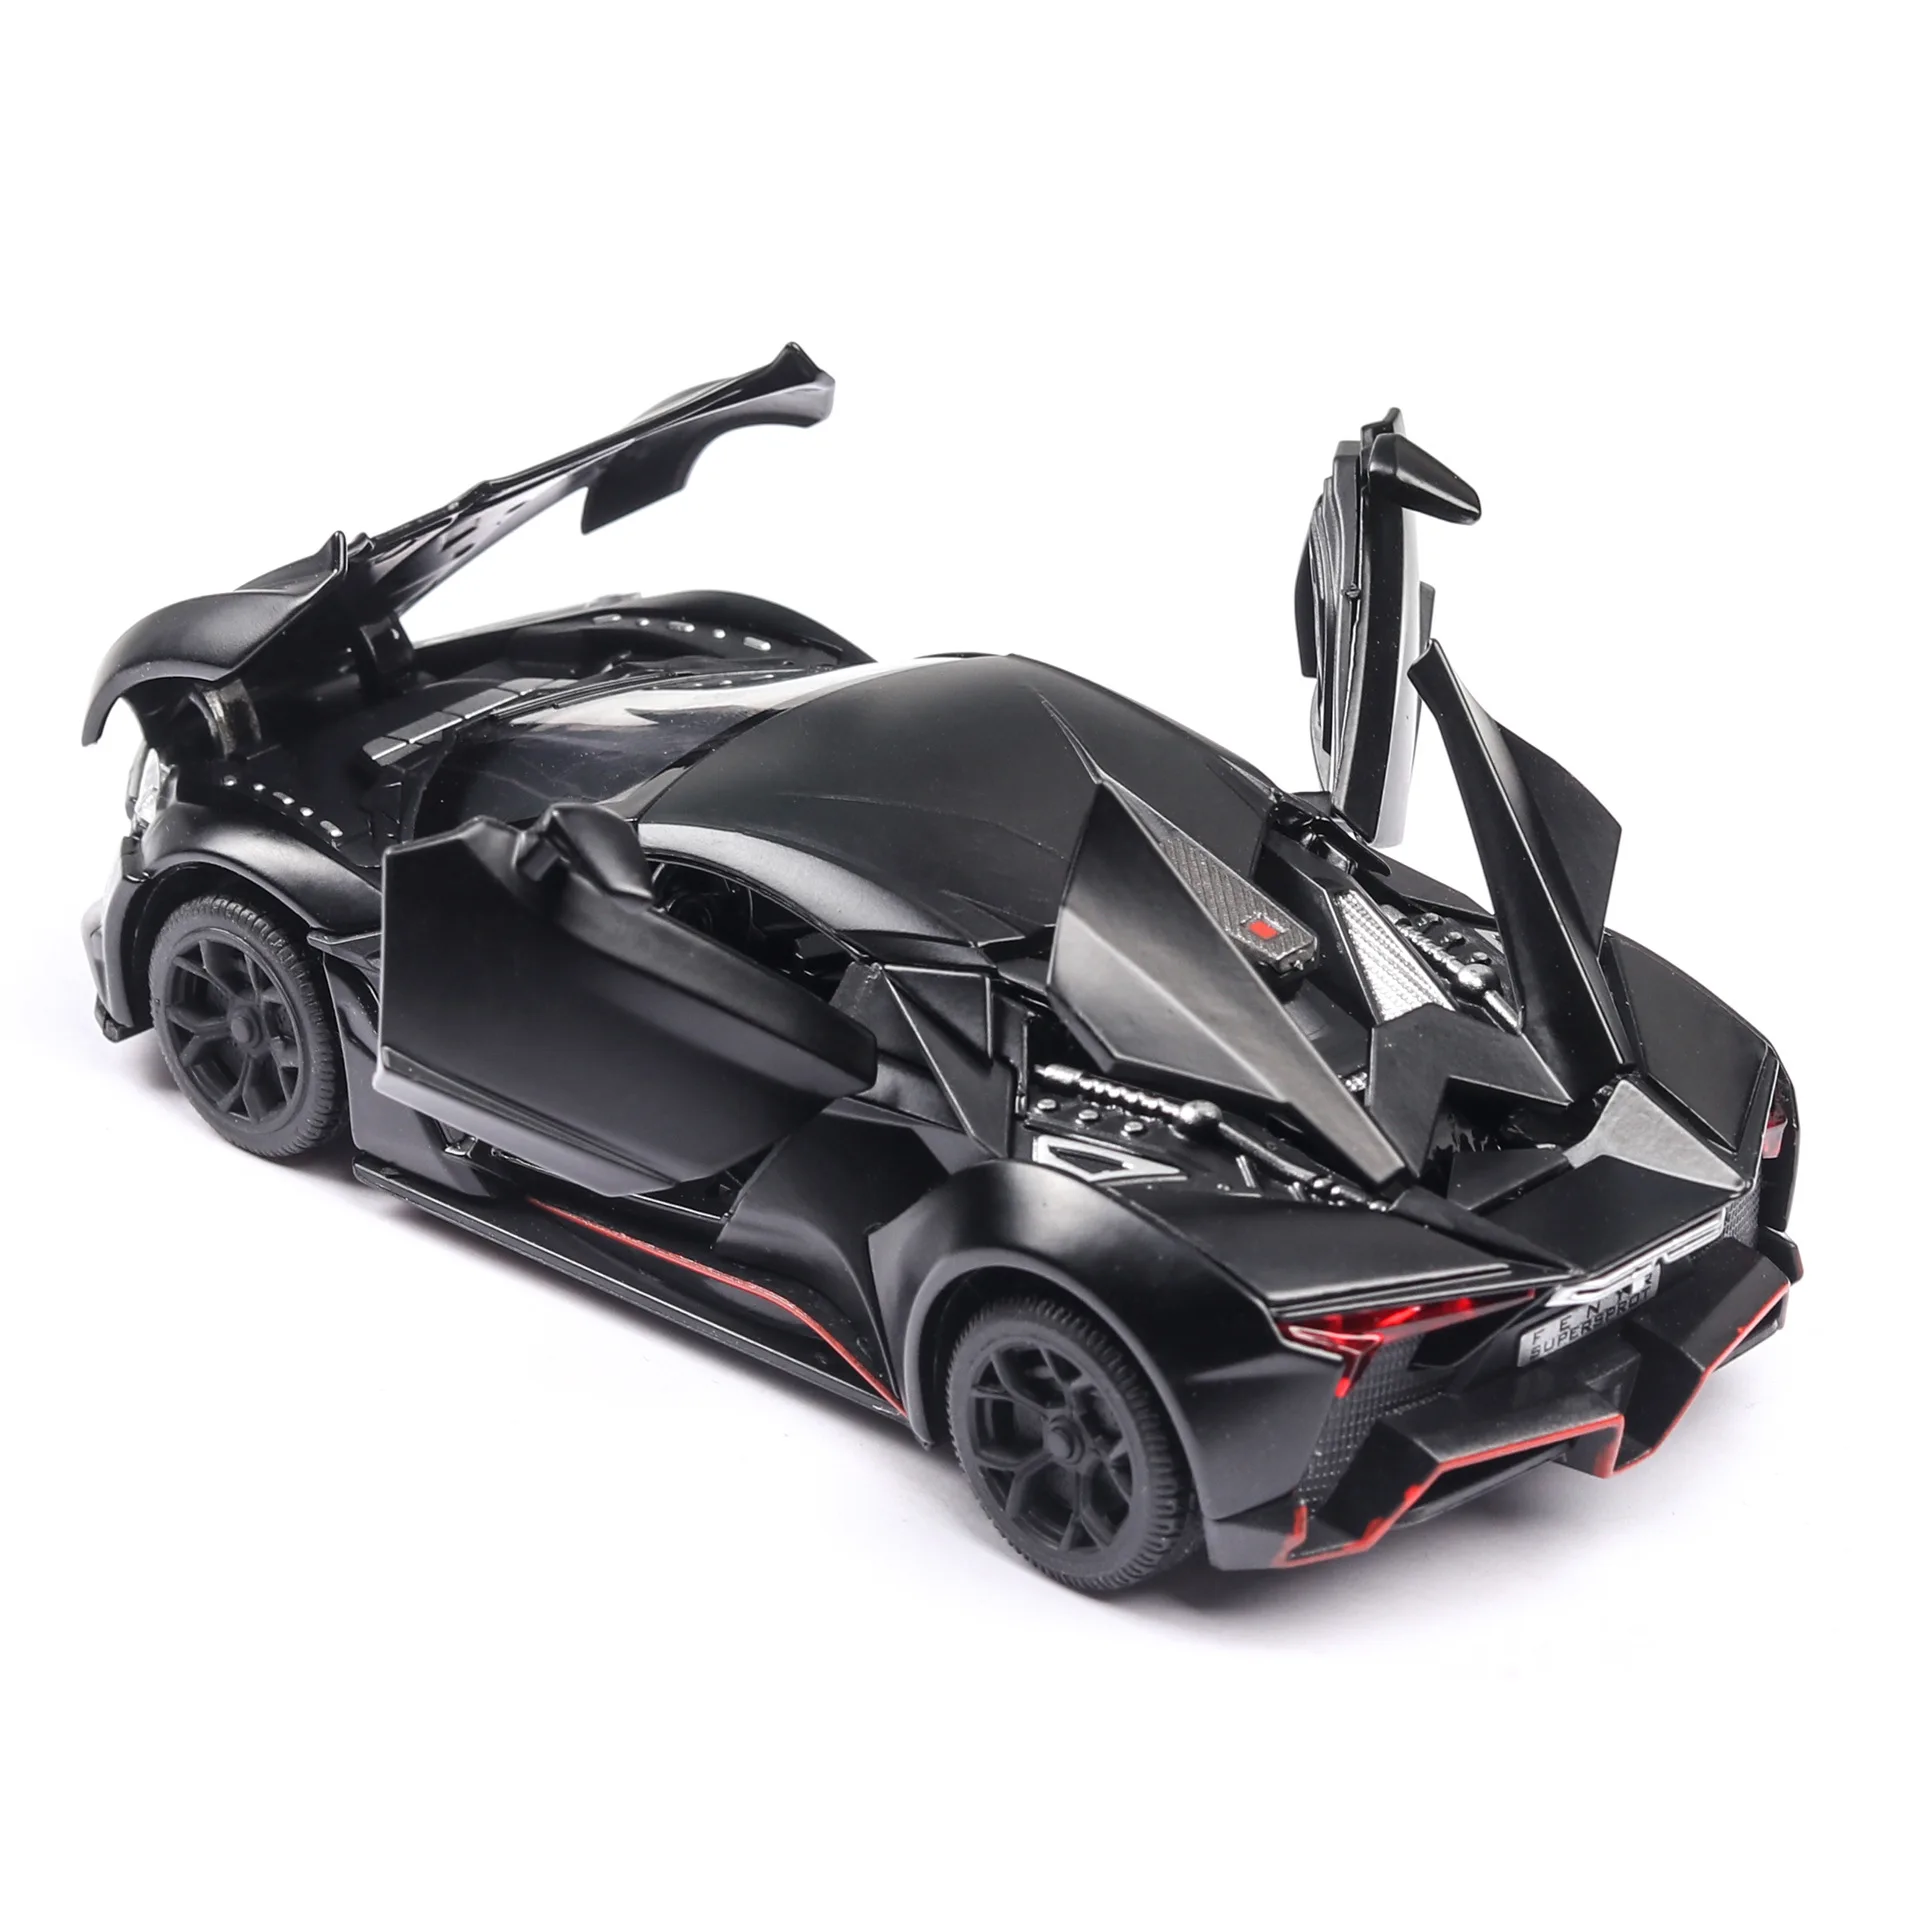 

Diecast 1:32 New Lyken Sport-car Model Car Metal Alloy Car Simulation Pull Back Vehicles Cars Toys For Kids Gifts For Children